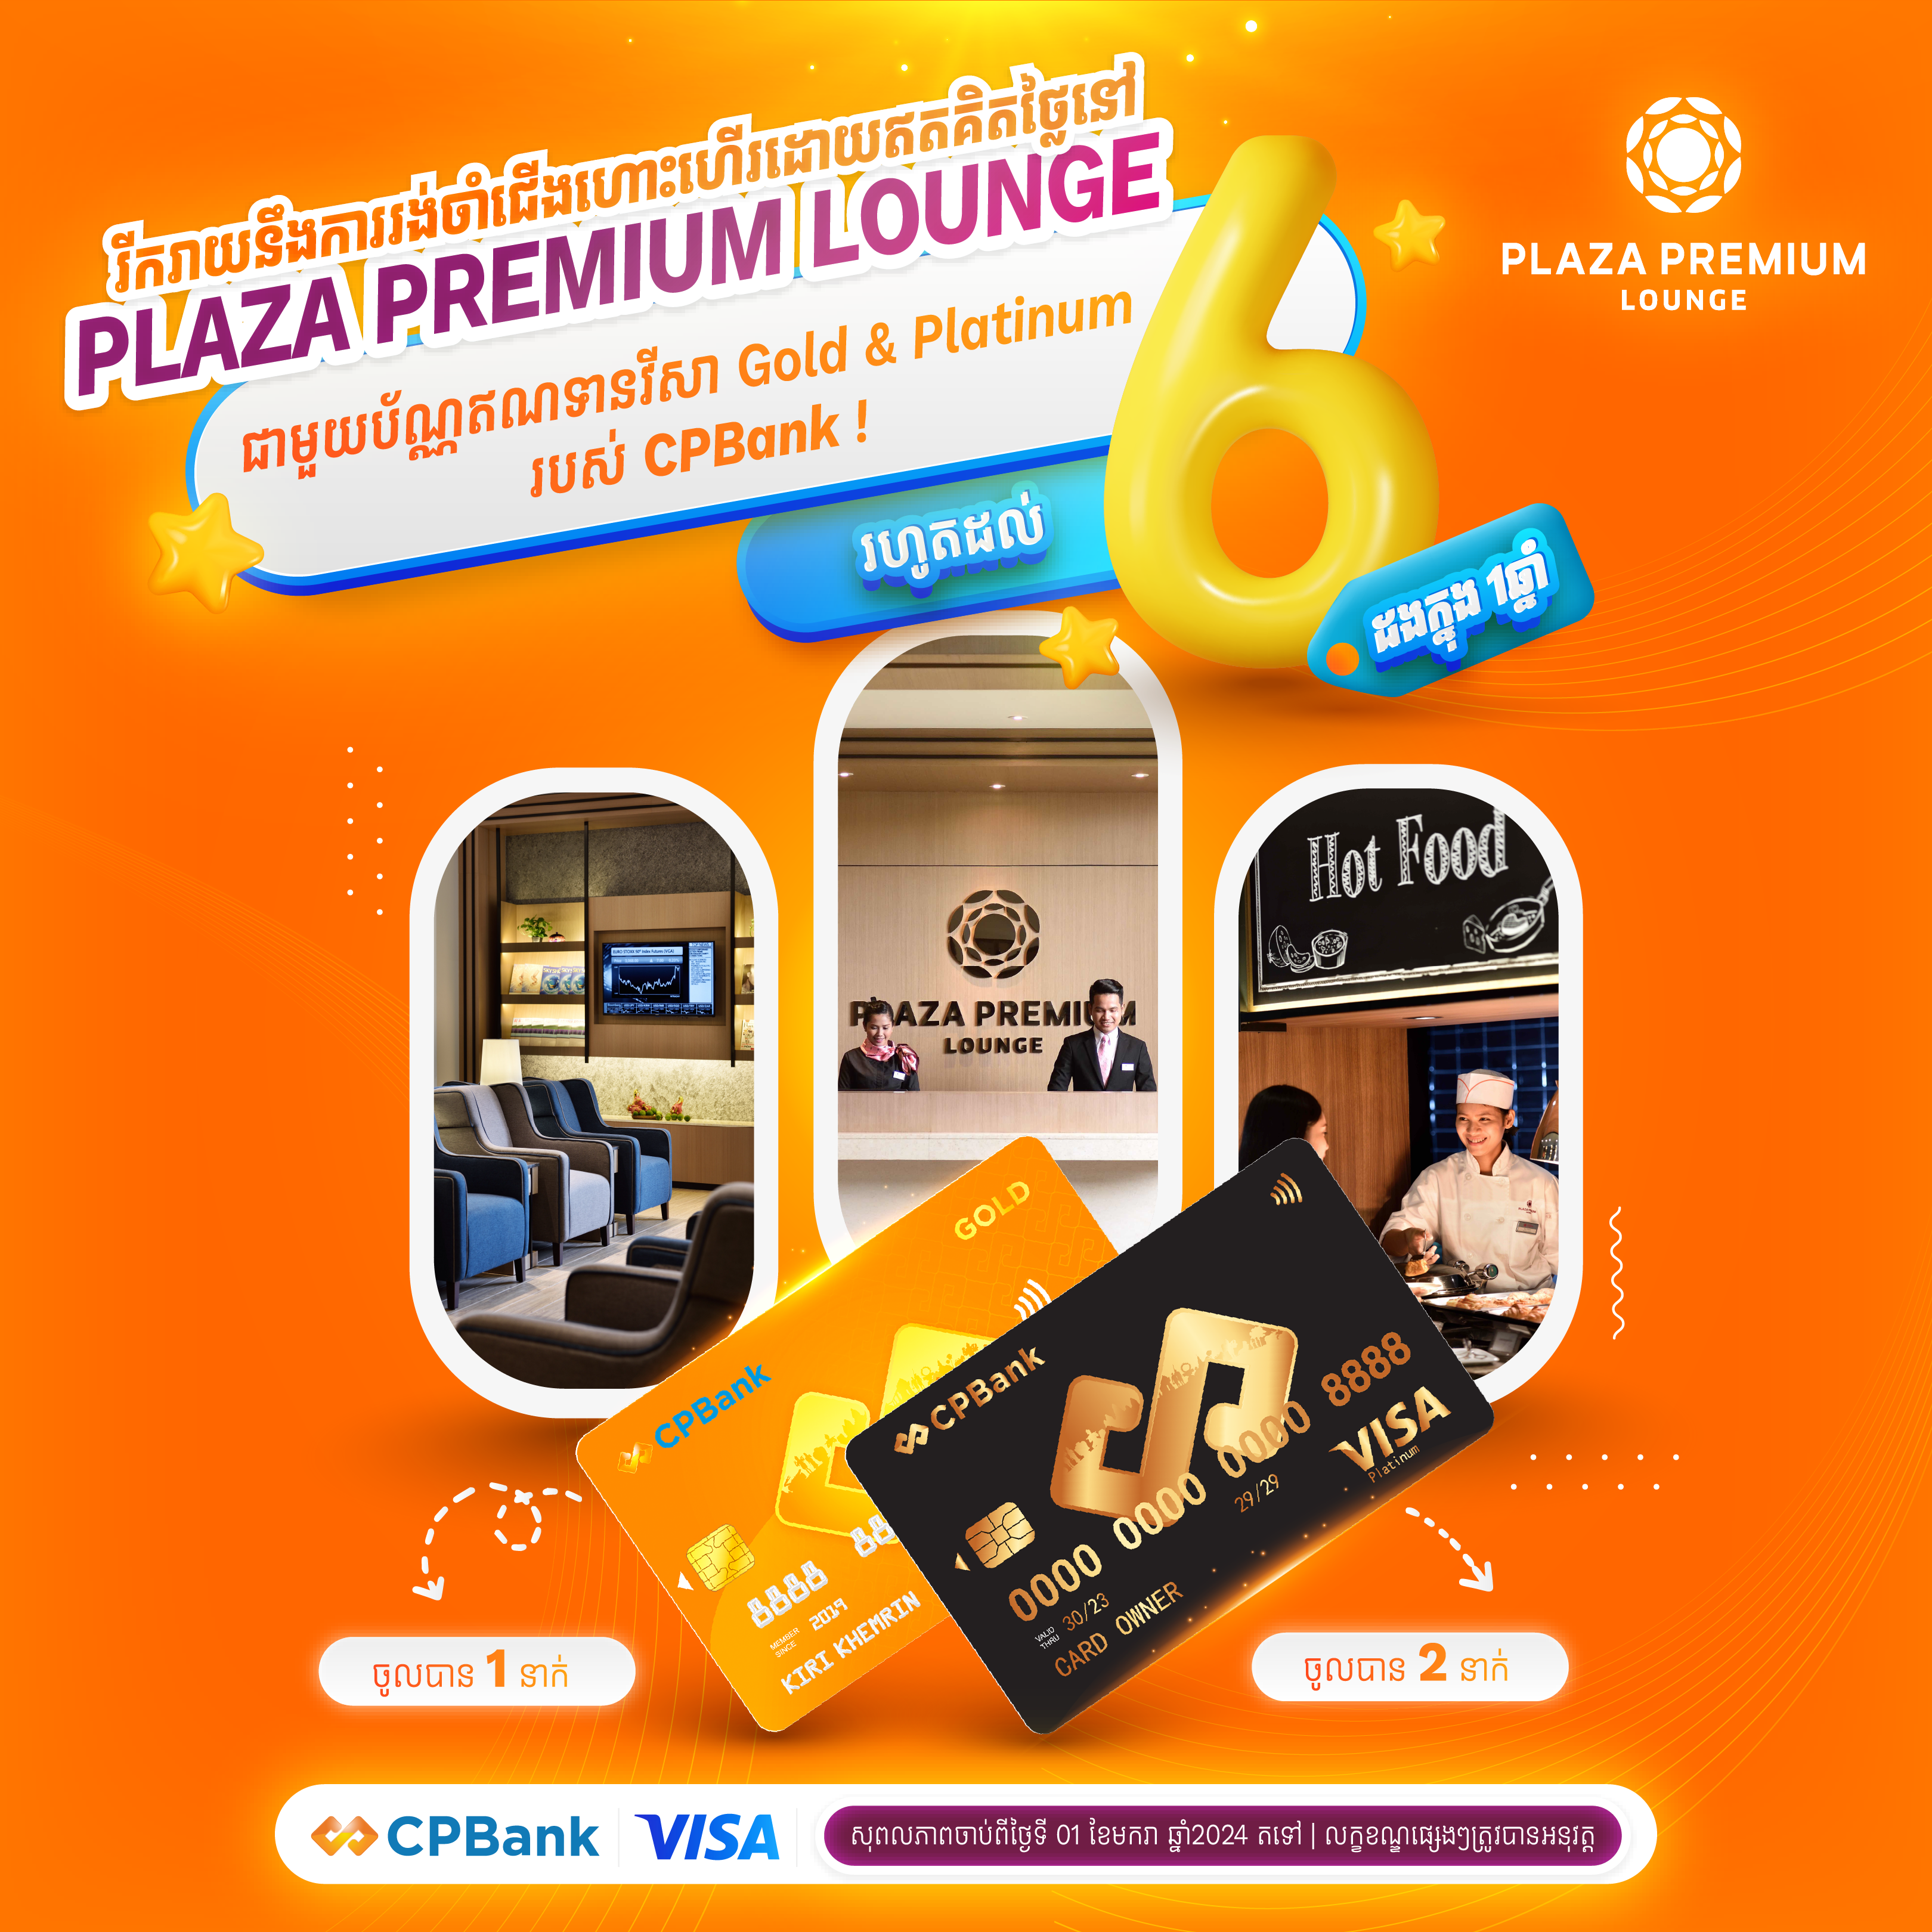 Get a luxurious experience for traveling with free access to the Plaza Premium Lounge